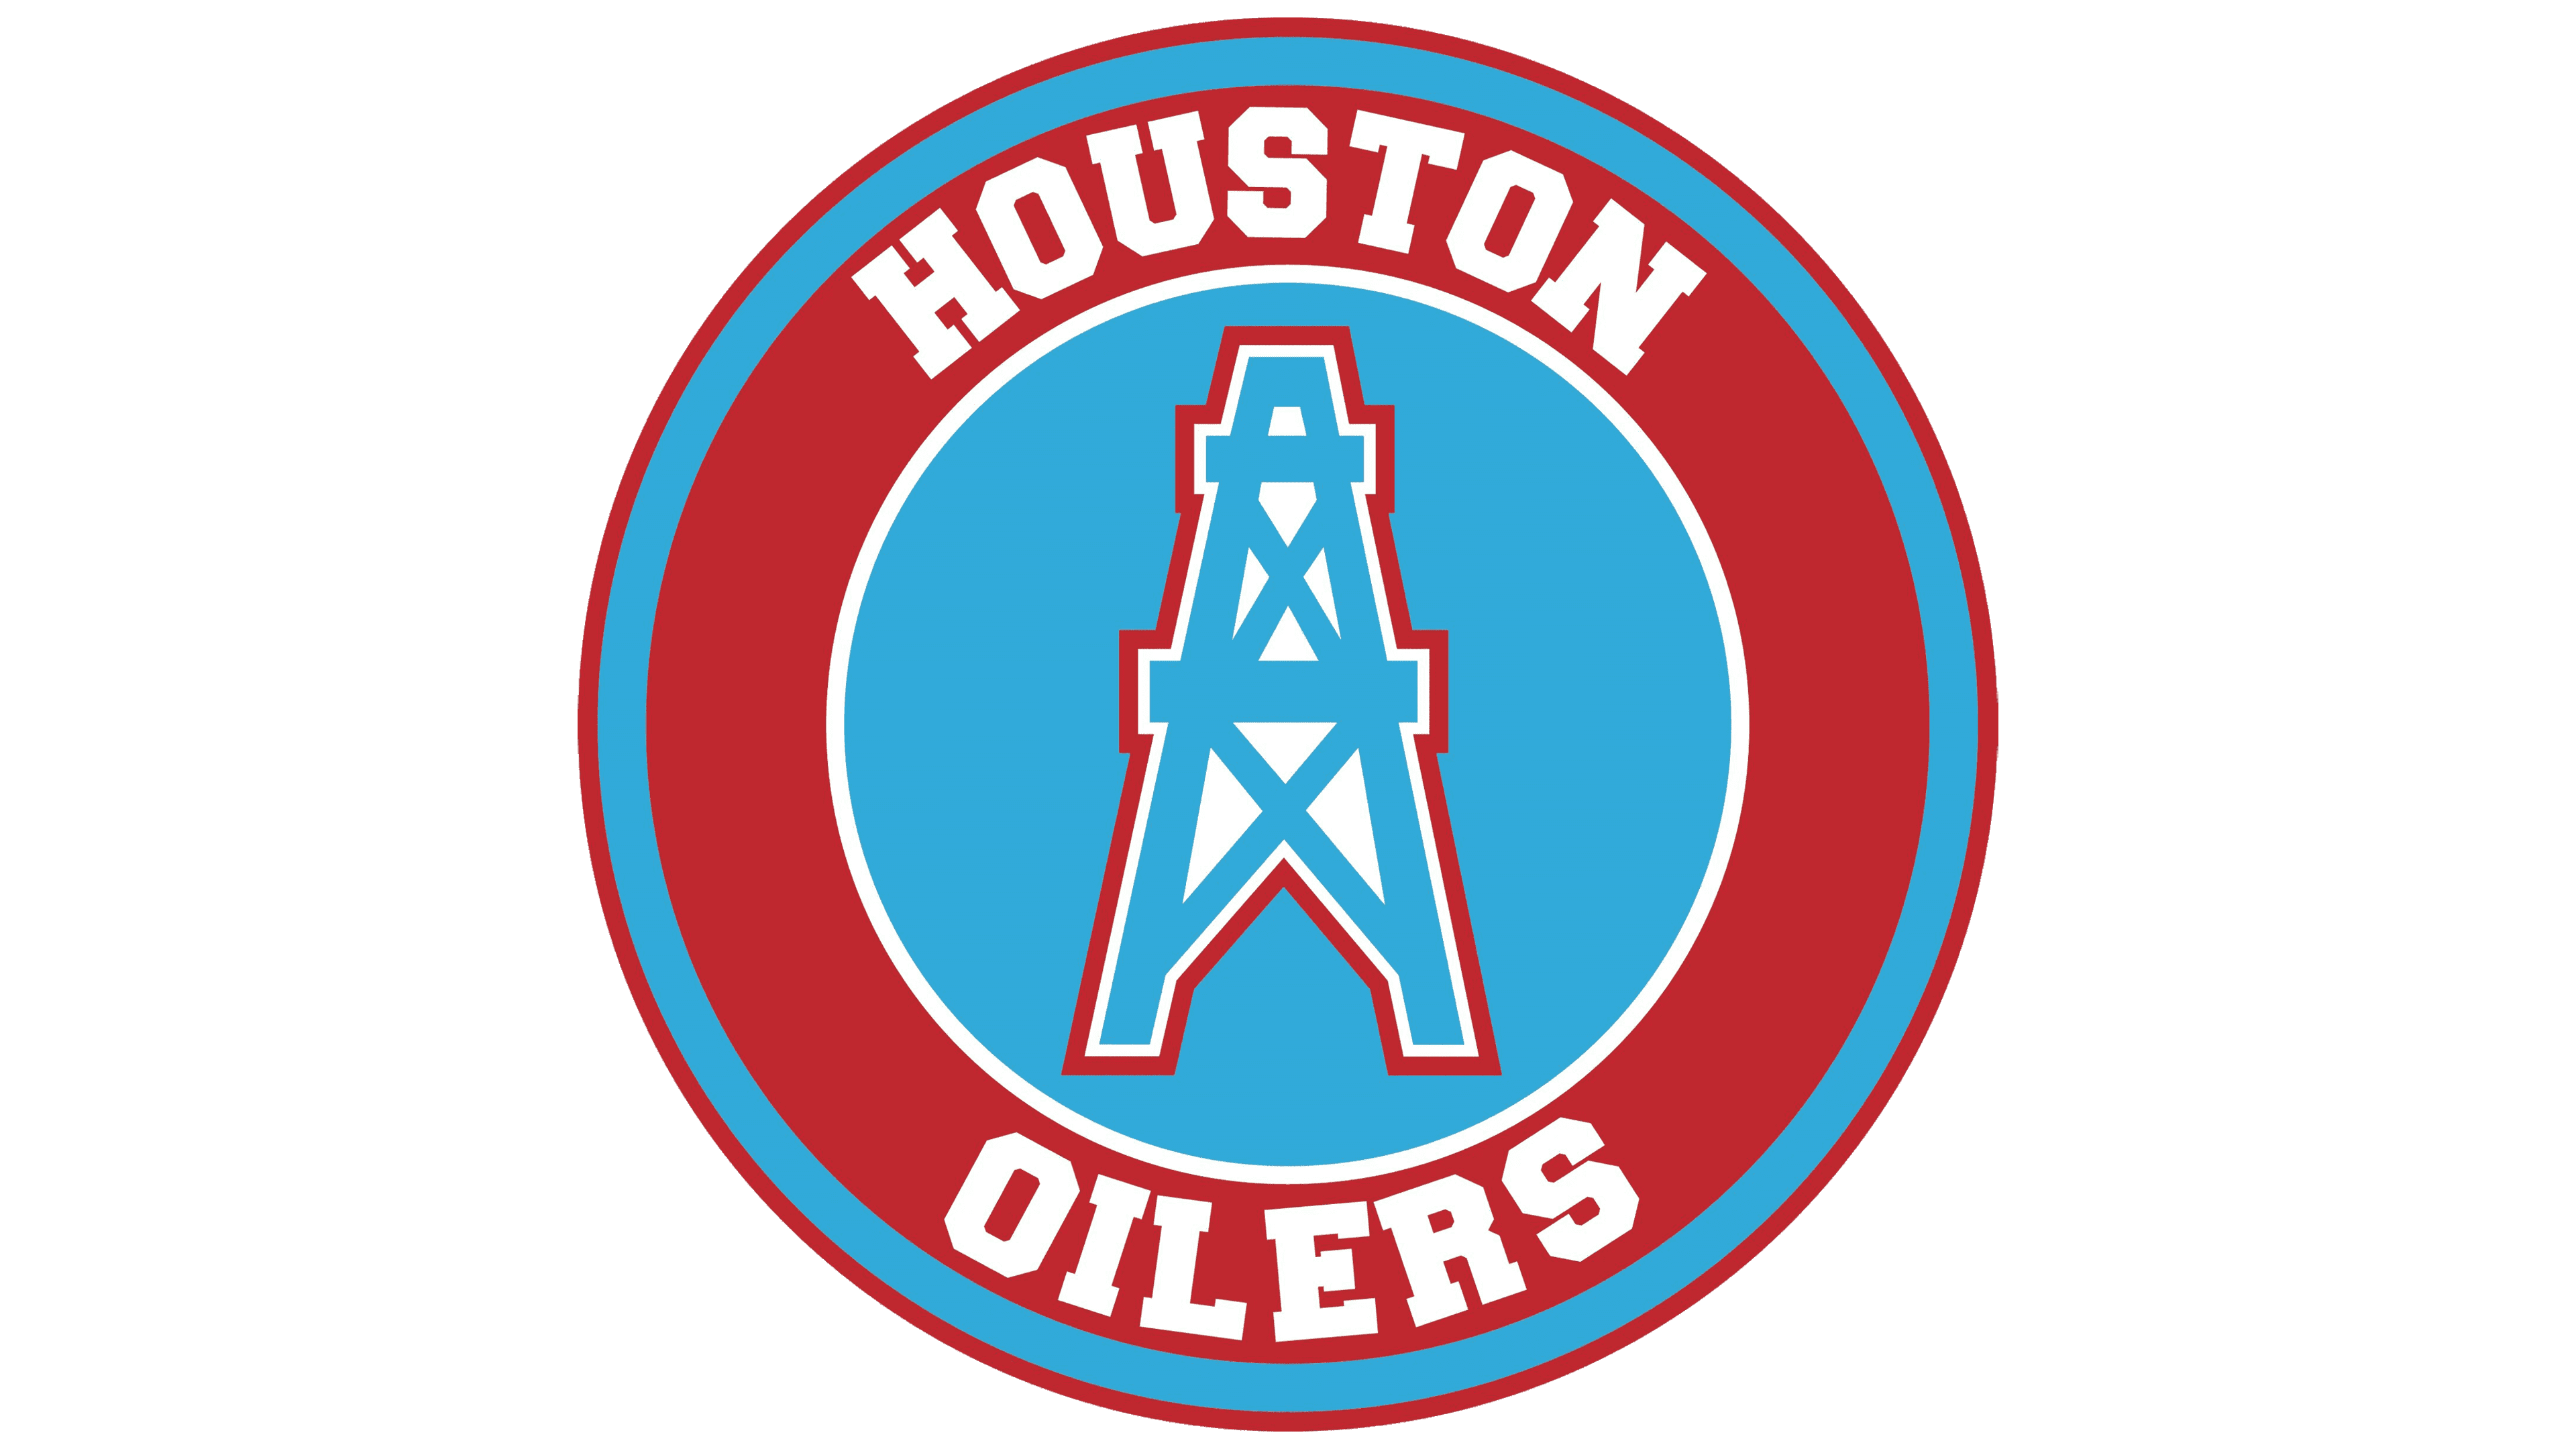 Houston Oilers Logo and sign, new logo meaning and history, PNG, SVG